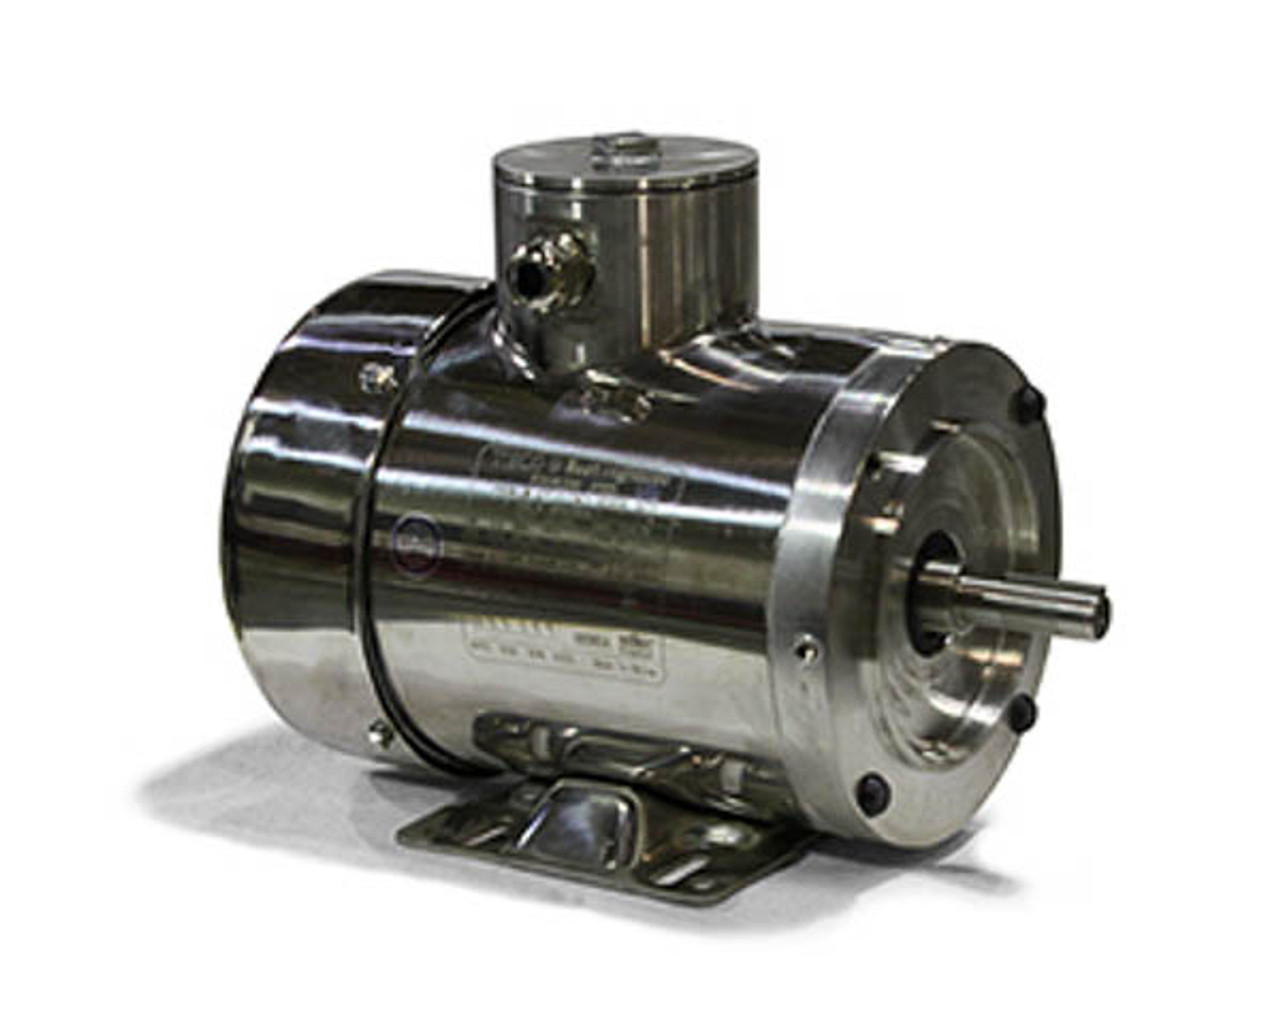 Stainless steel electric motor with c-face